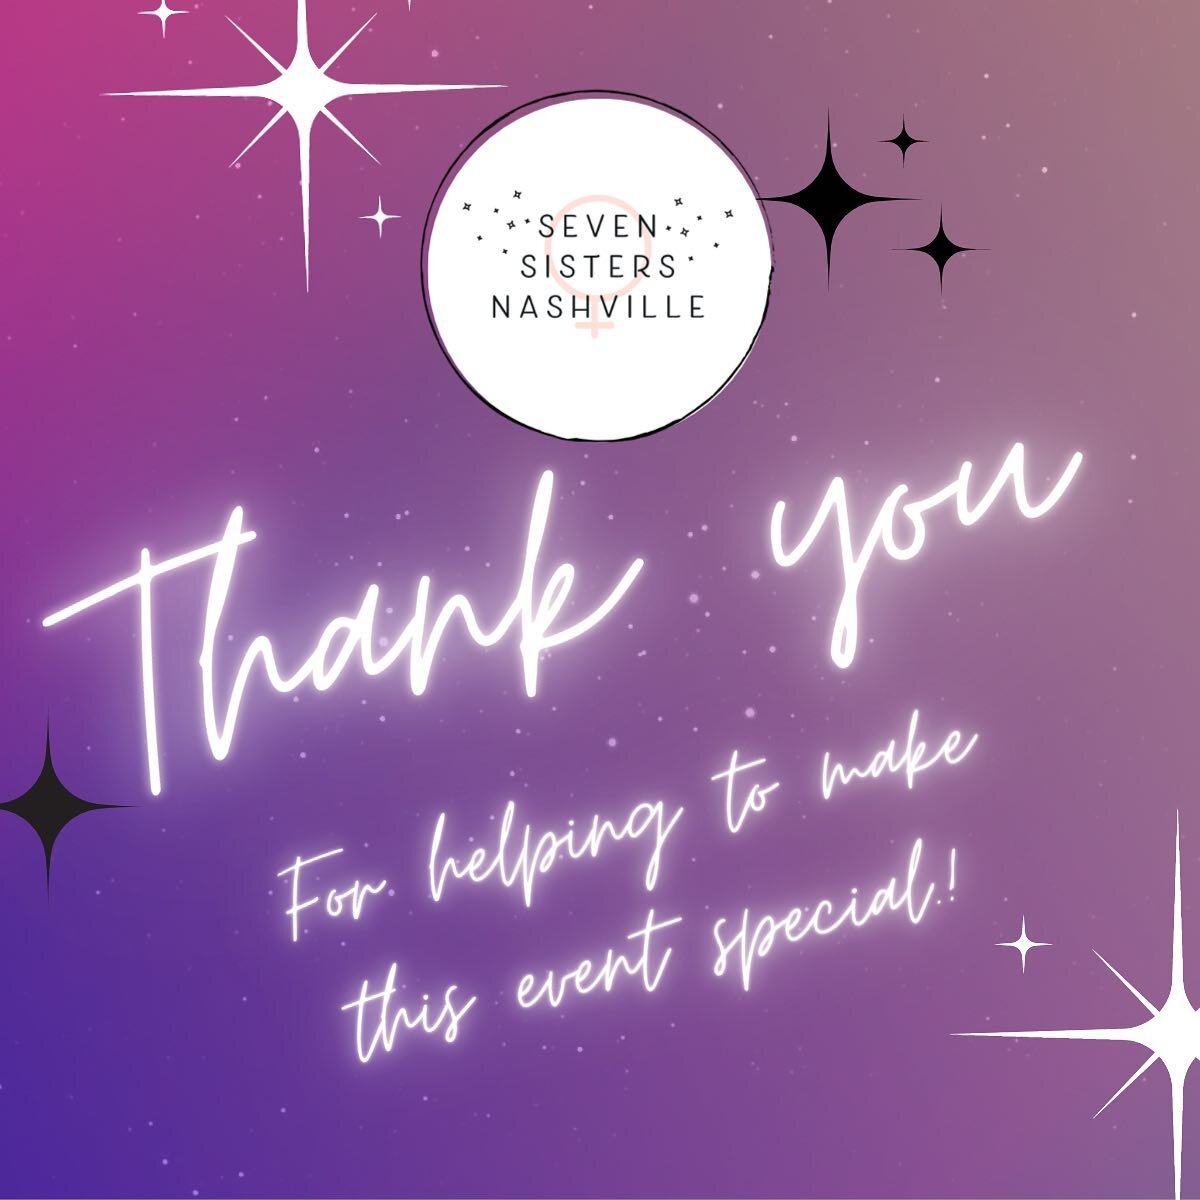 Thanks to all the wonderful women business owners and artists who participated in the market! We loved sharing this space with you all. 💜
 #sevensistersnashville